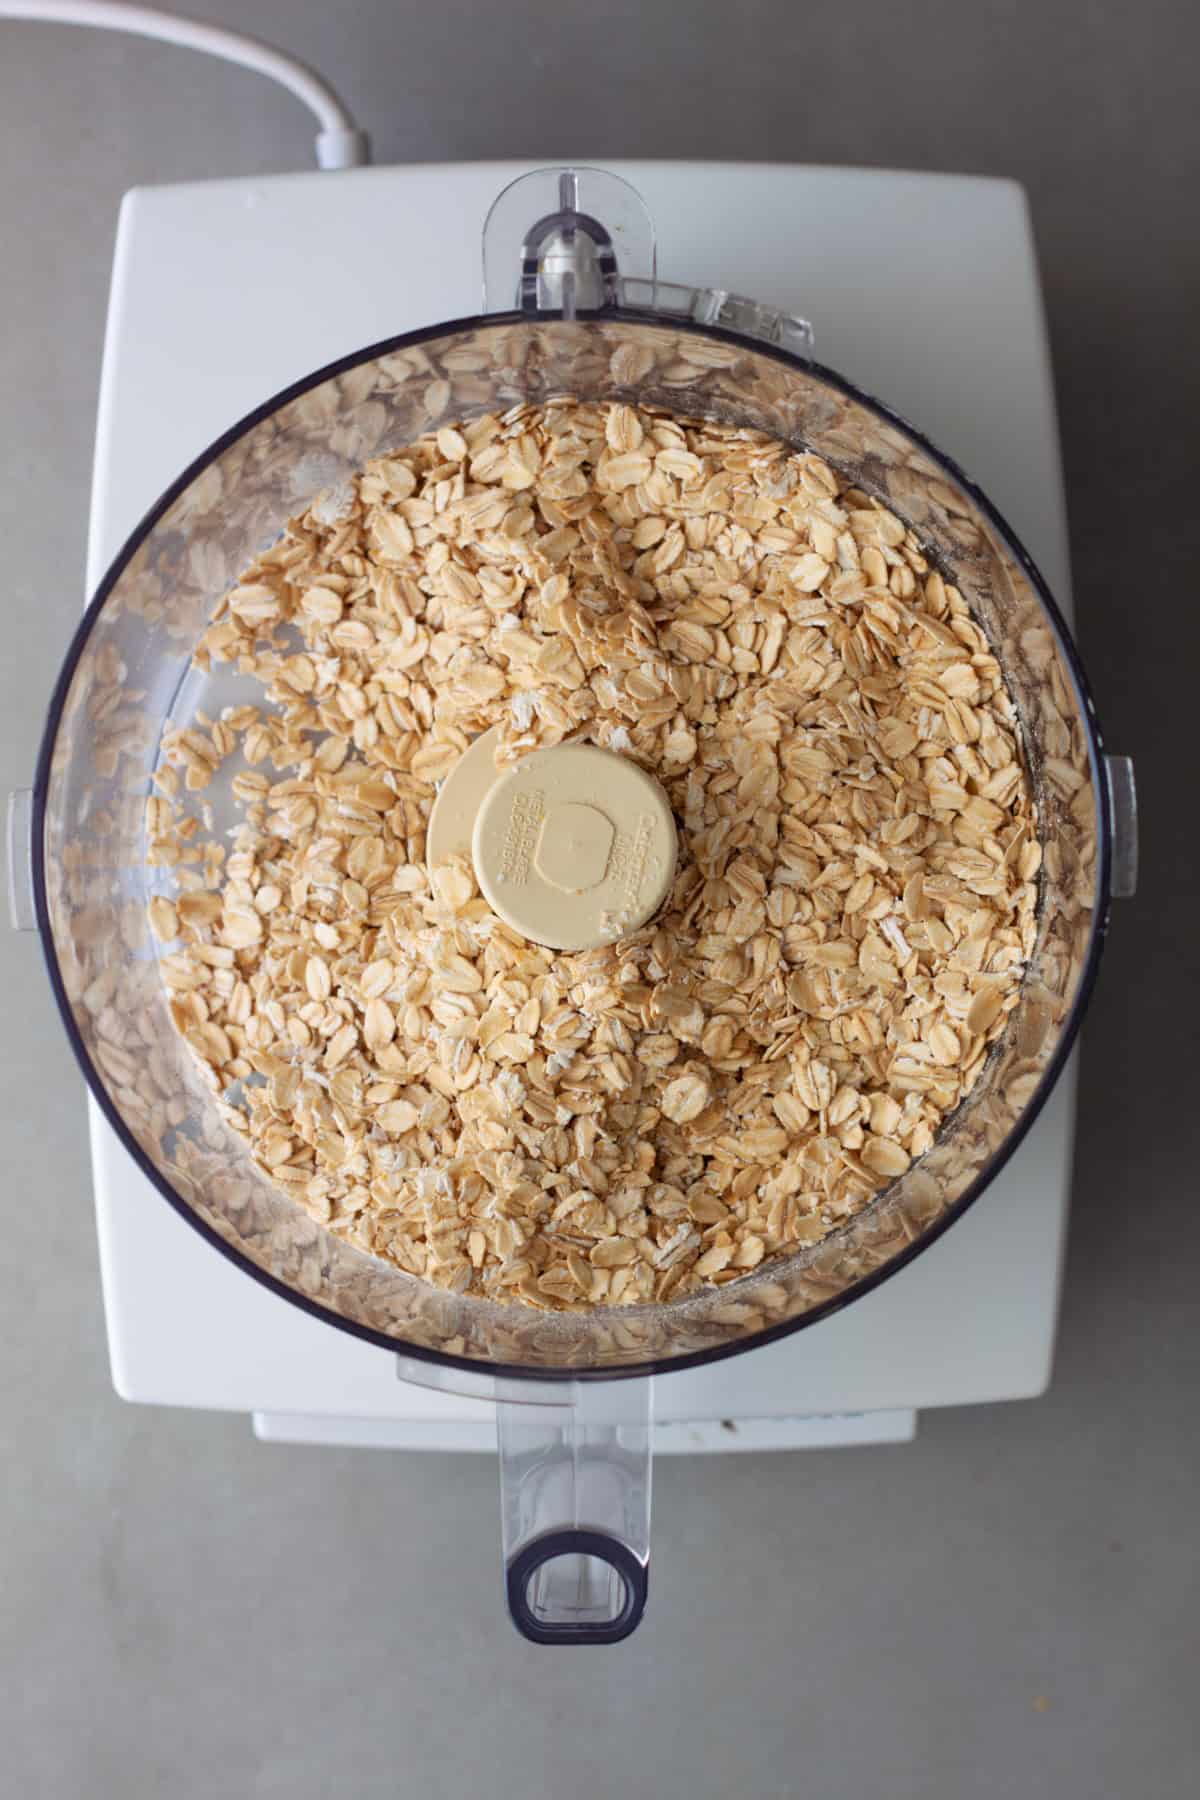 Rolled oats in the base of a food processor.